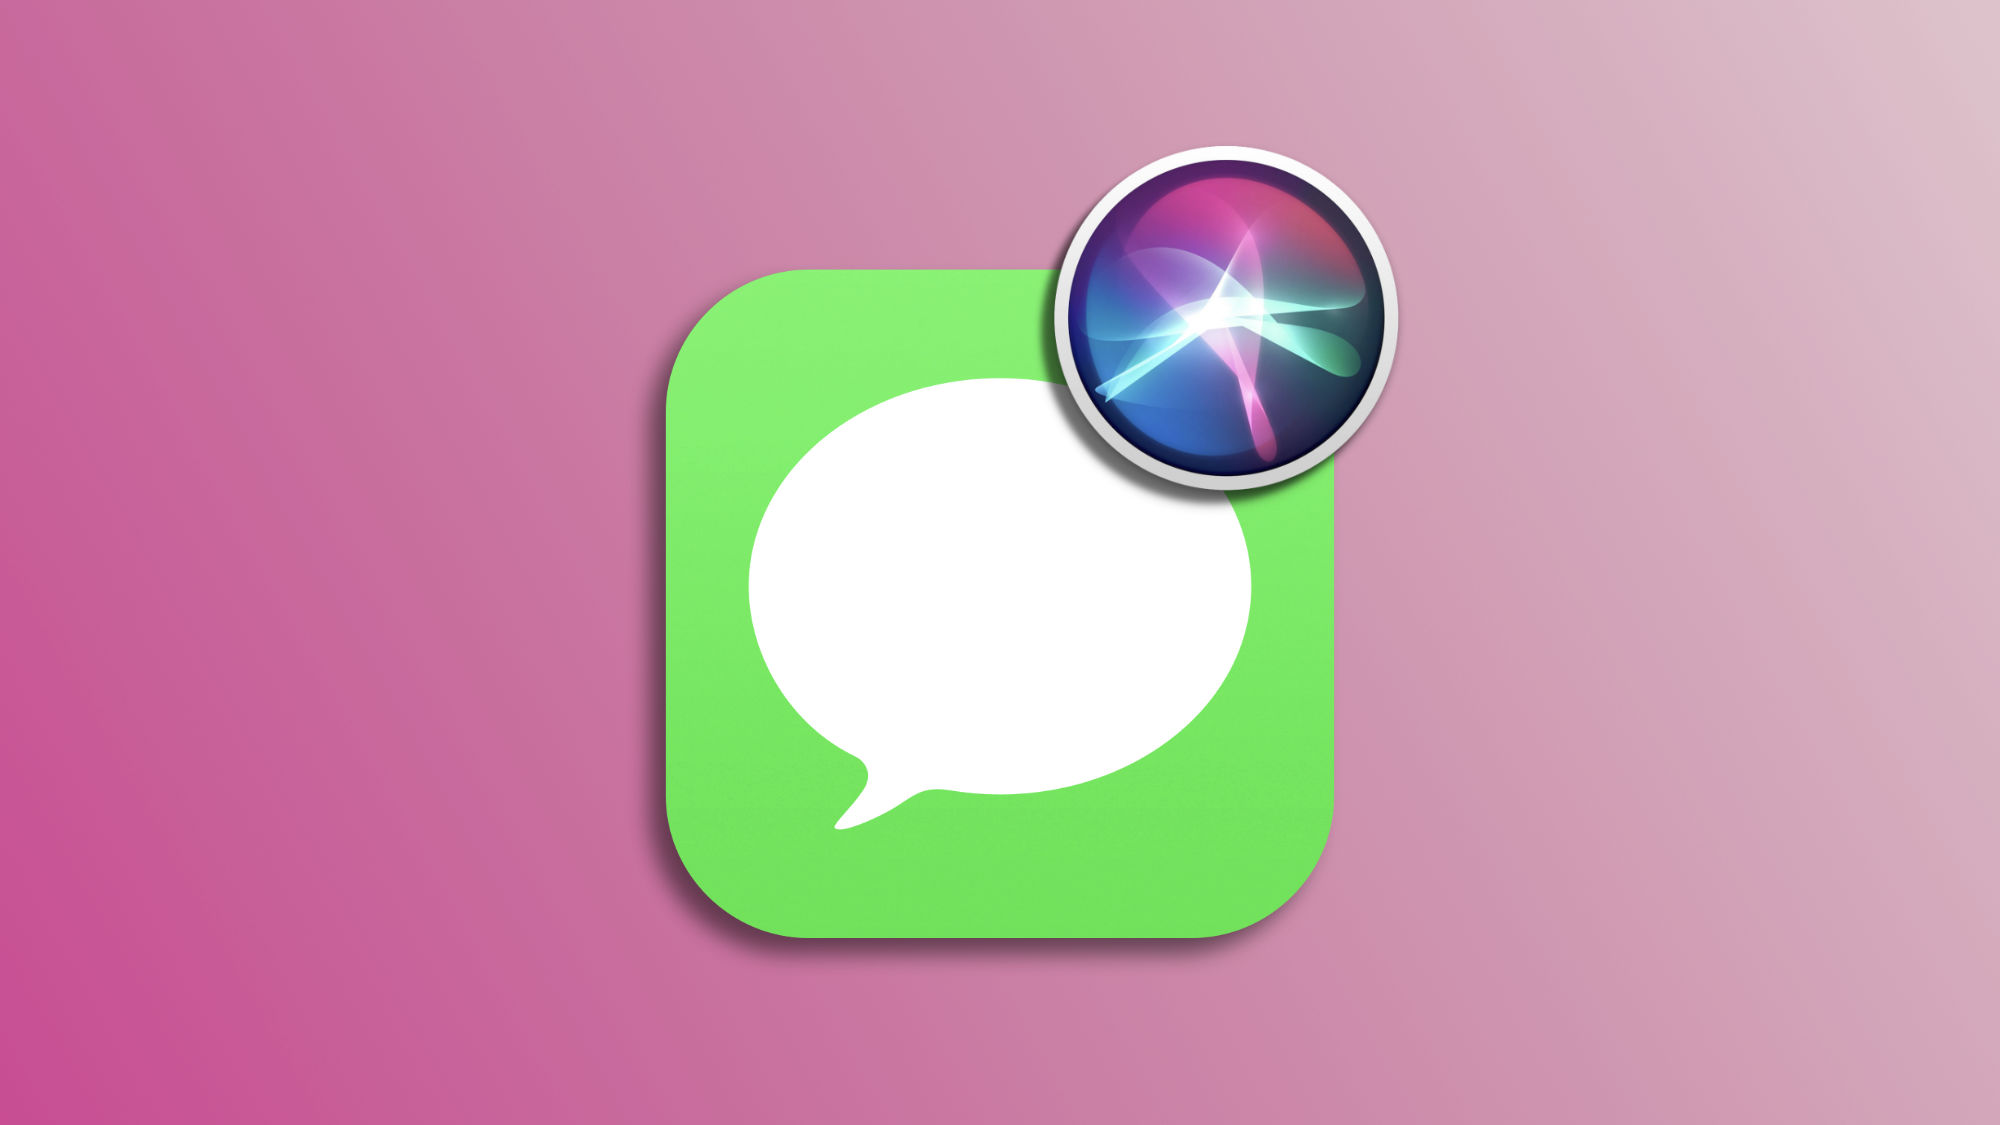 How to choose which app Siri uses to send a message